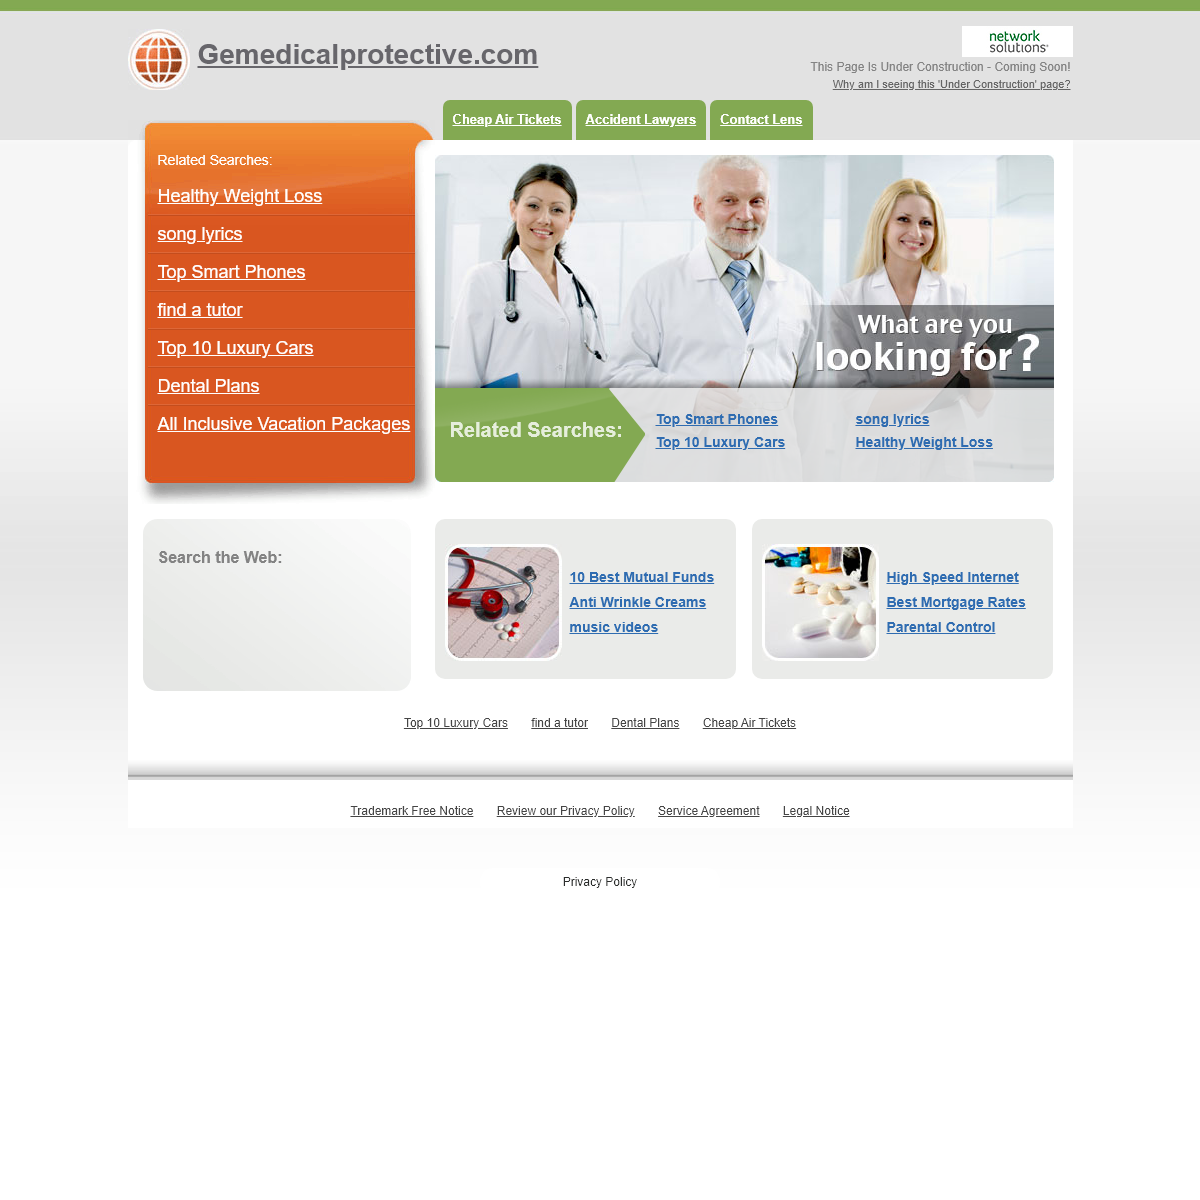 A complete backup of gemedicalprotective.com